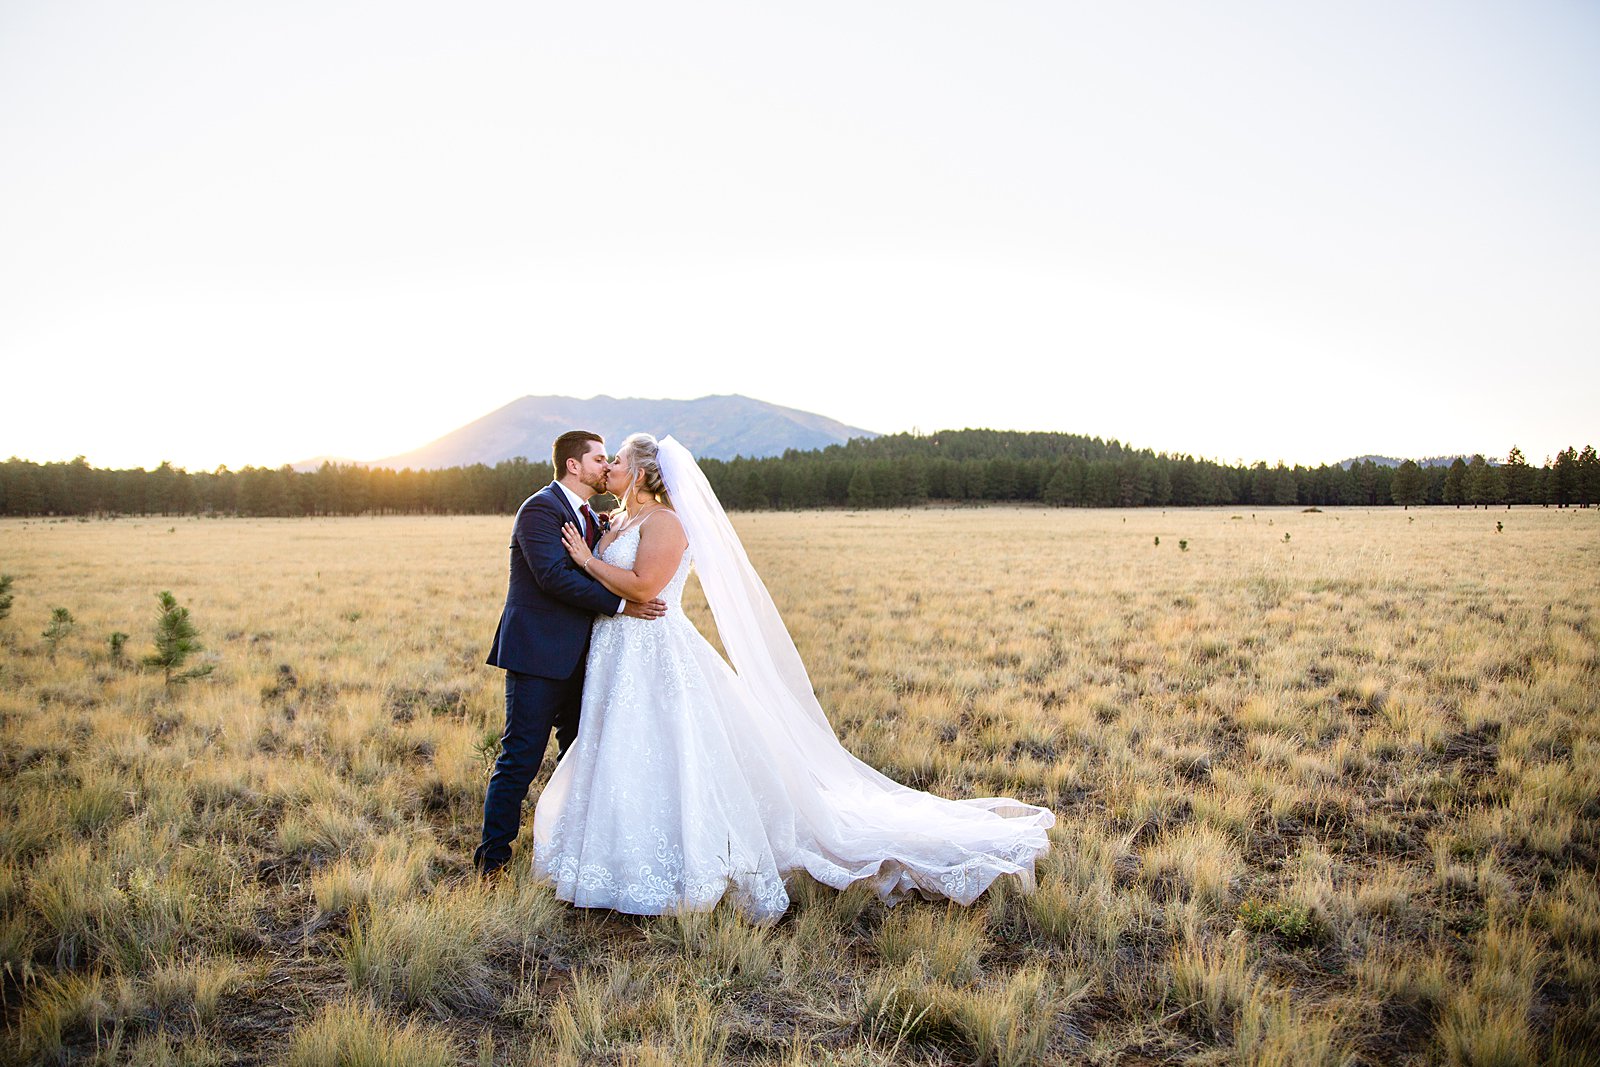 Bride and groom share a kiss in a field with a mountain backdrop at sunset by Flagstaff wedding photographers PMA Photography.